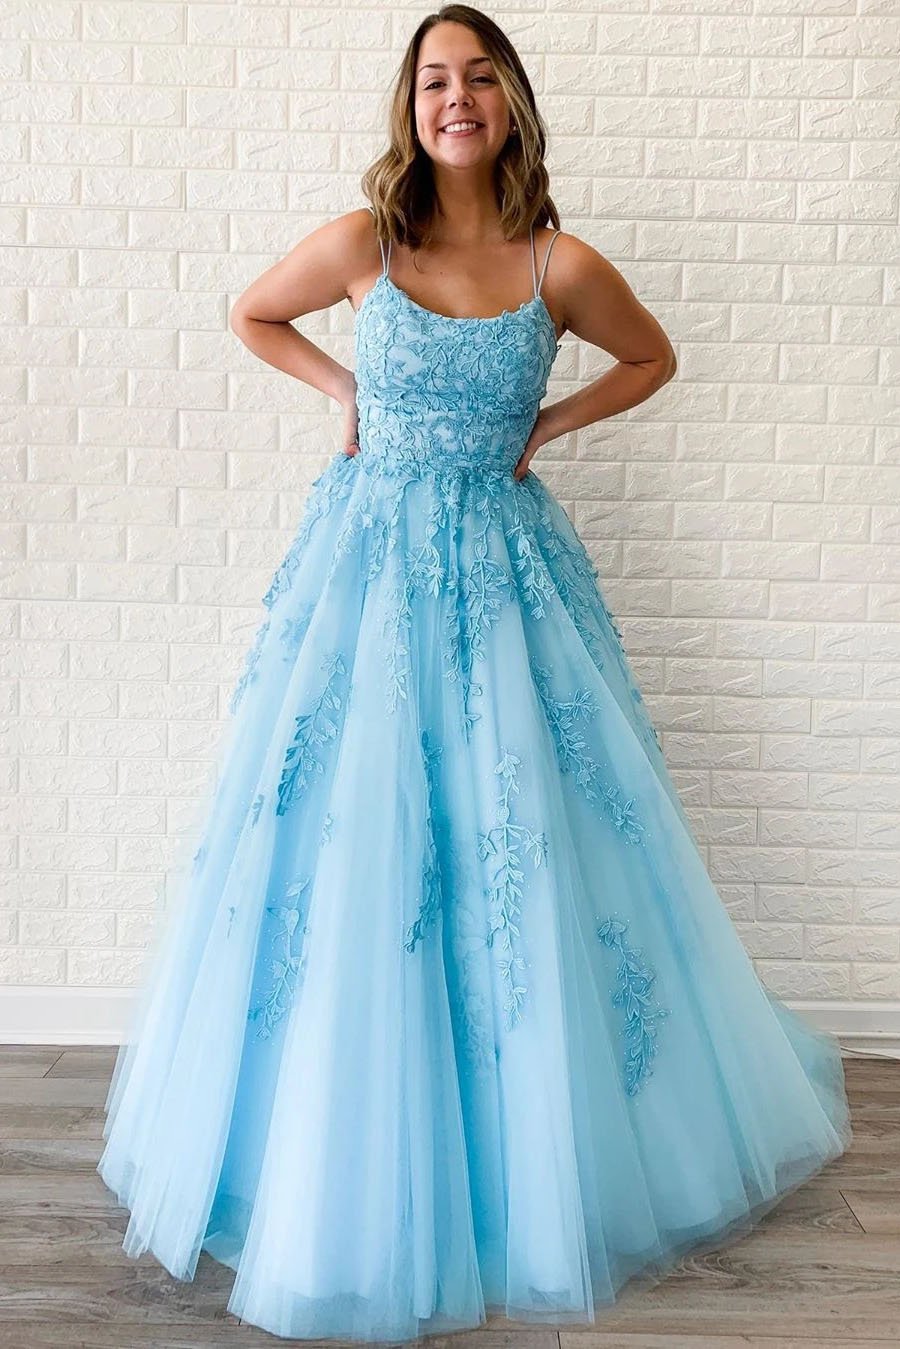 Unique A-Line Sky Blue Tulle Appliques Beads Scoop Prom Dresses with Lace STC15681